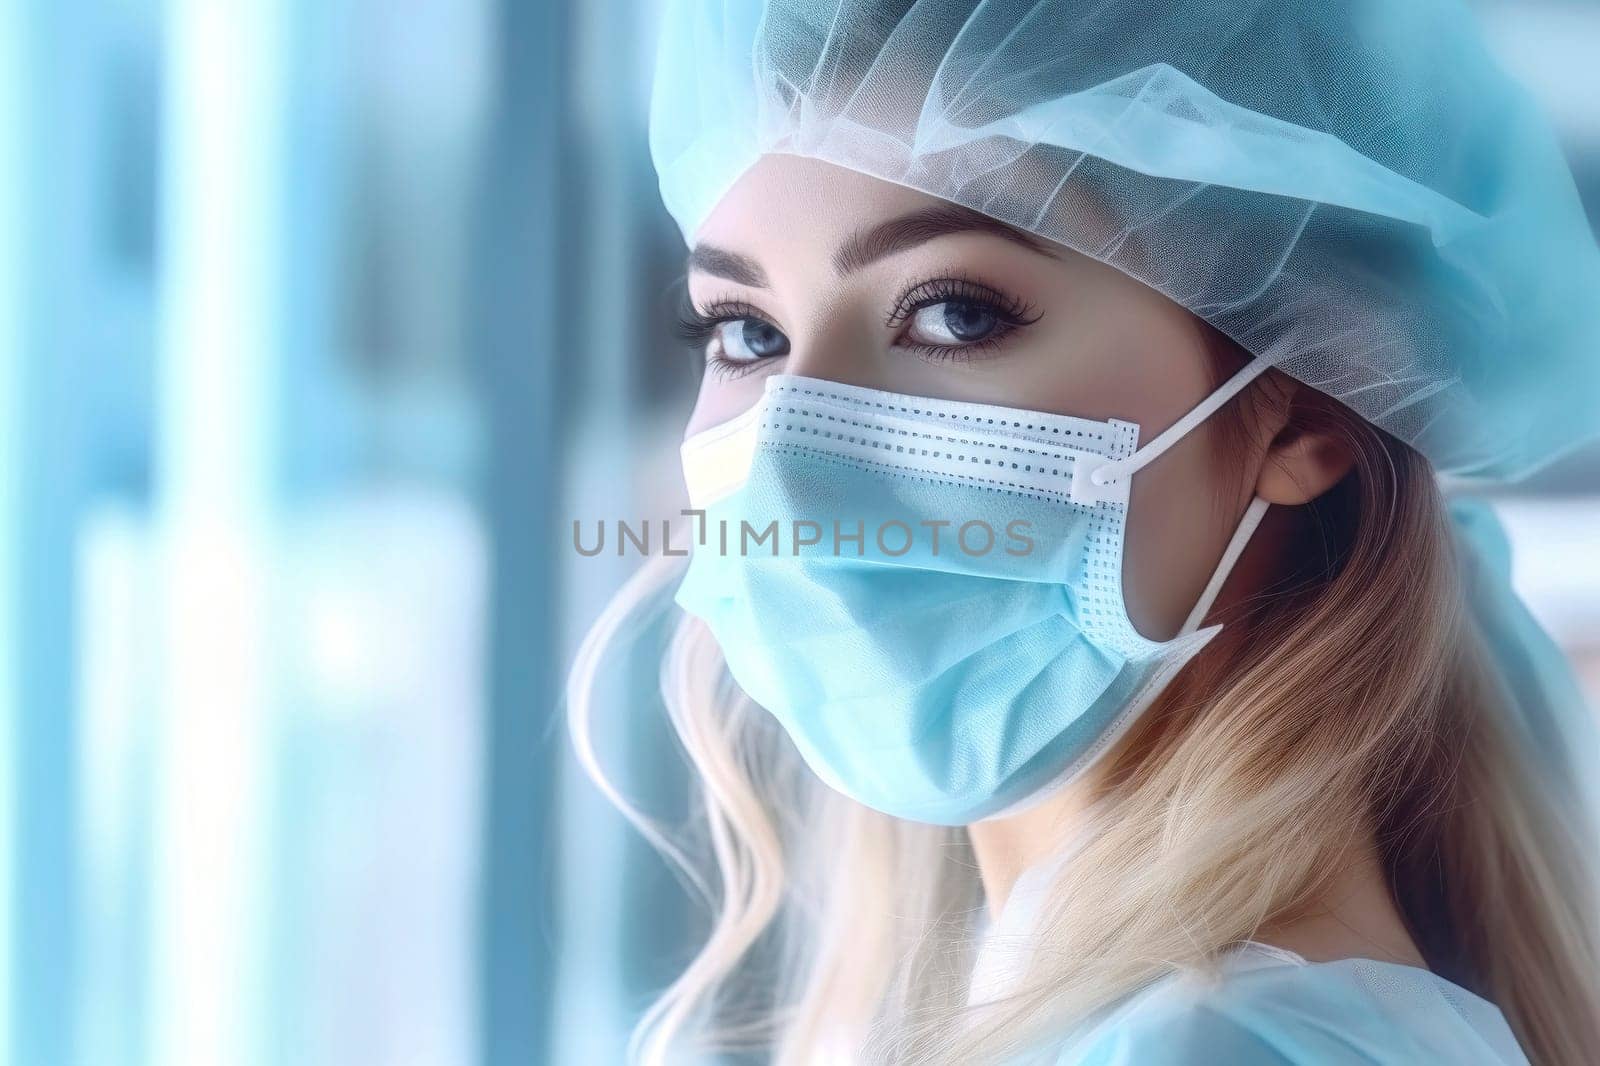 Young healthcare worker wearing medical mask amidst global pandemic, ensuring safety